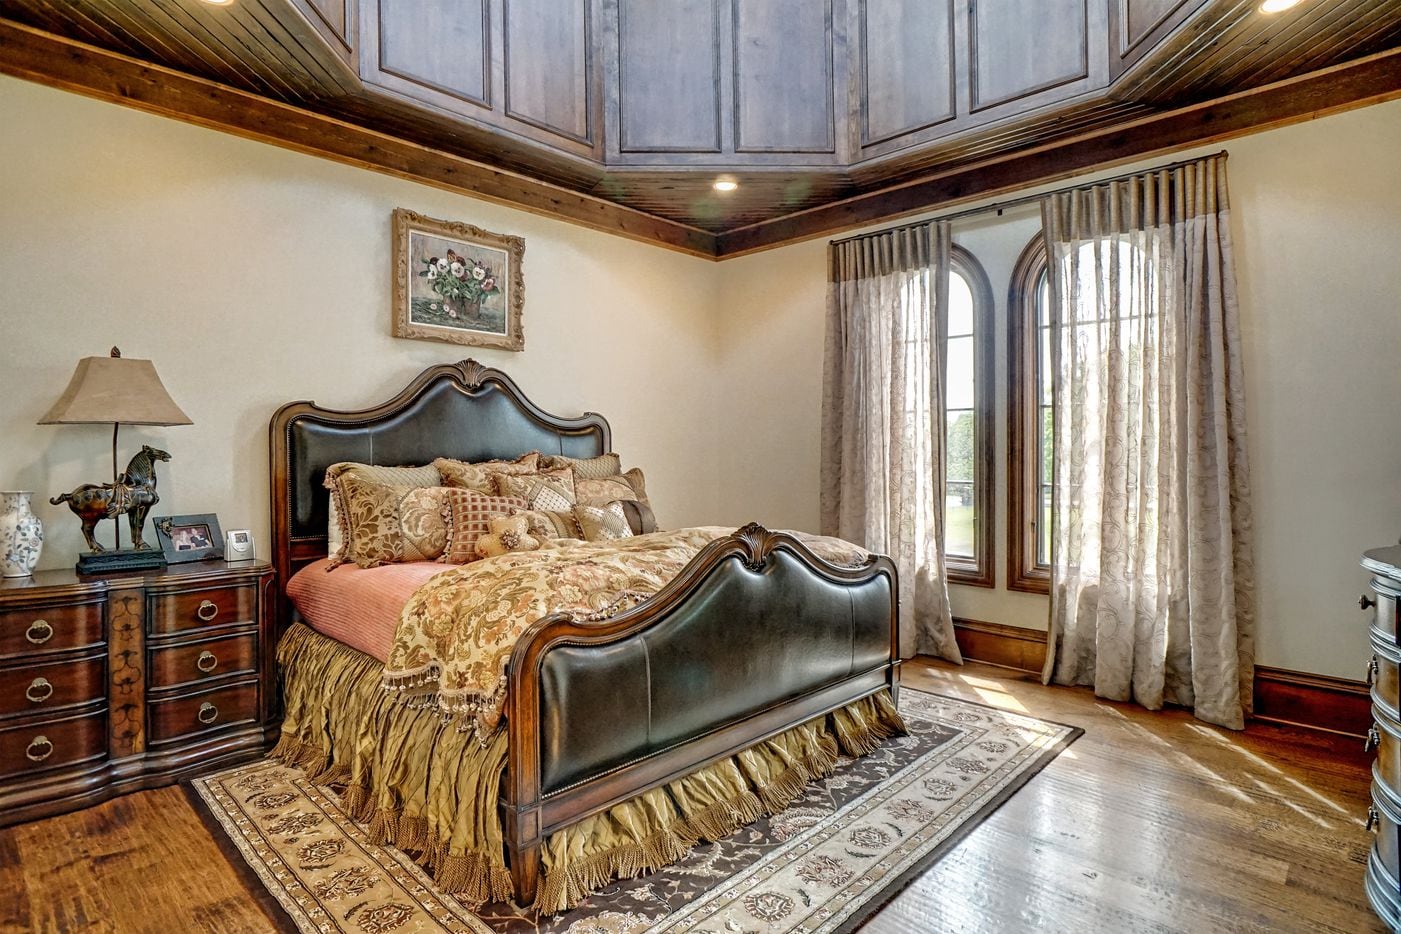 Another bedroom at 5513 Montclair Drive in Colleyville, TX.